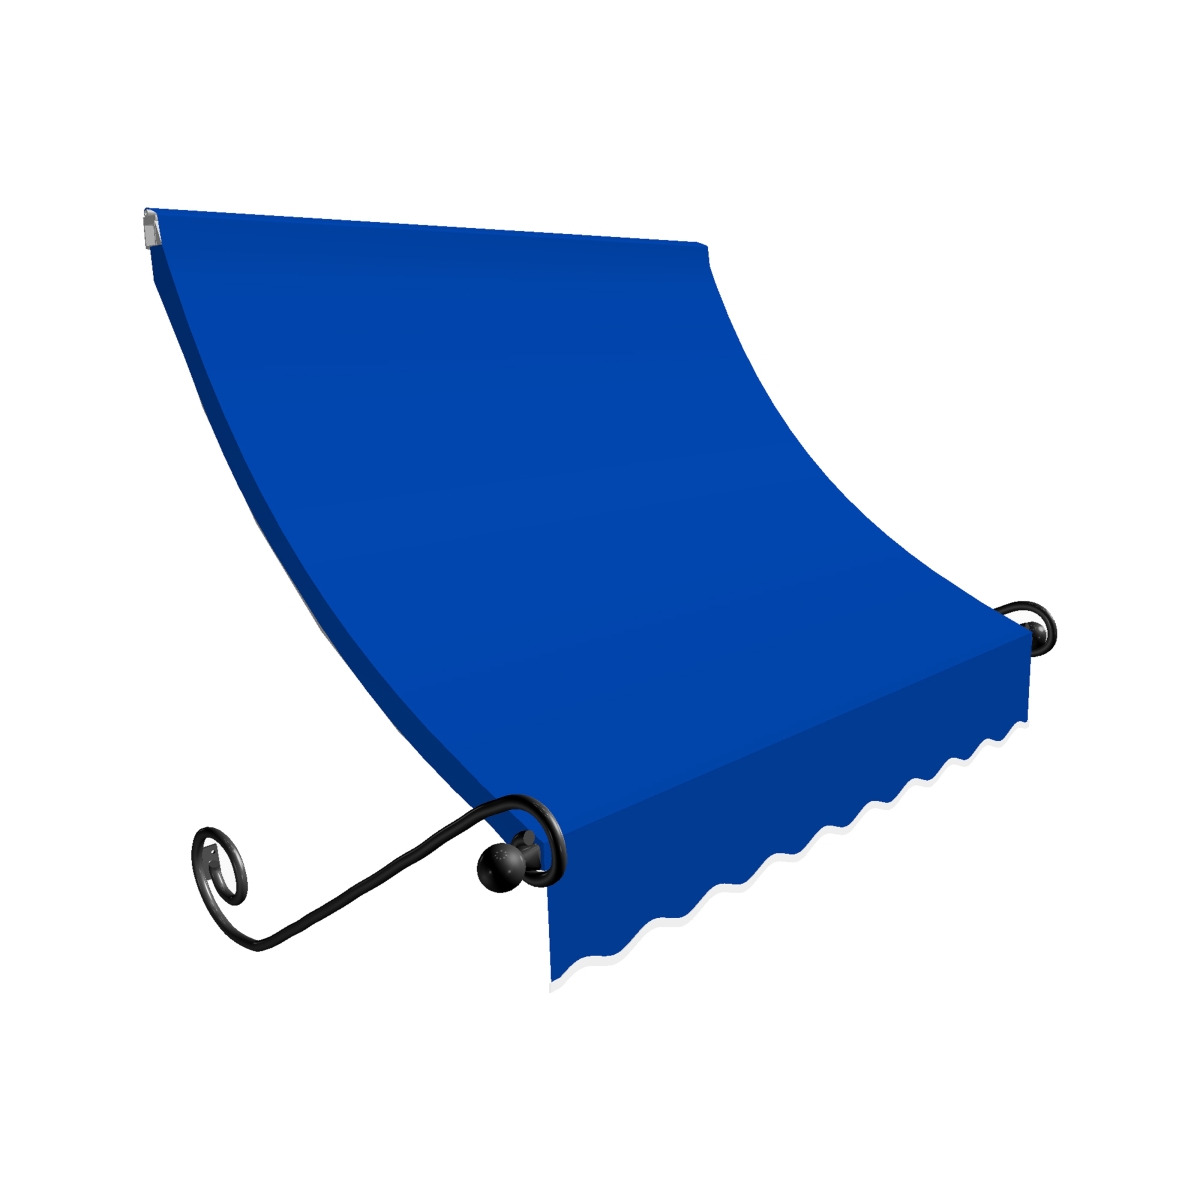 Ch33-us-4bb 4.38 Ft. Charleston Window & Entry Awning, Bright Blue - 44 X 36 In.